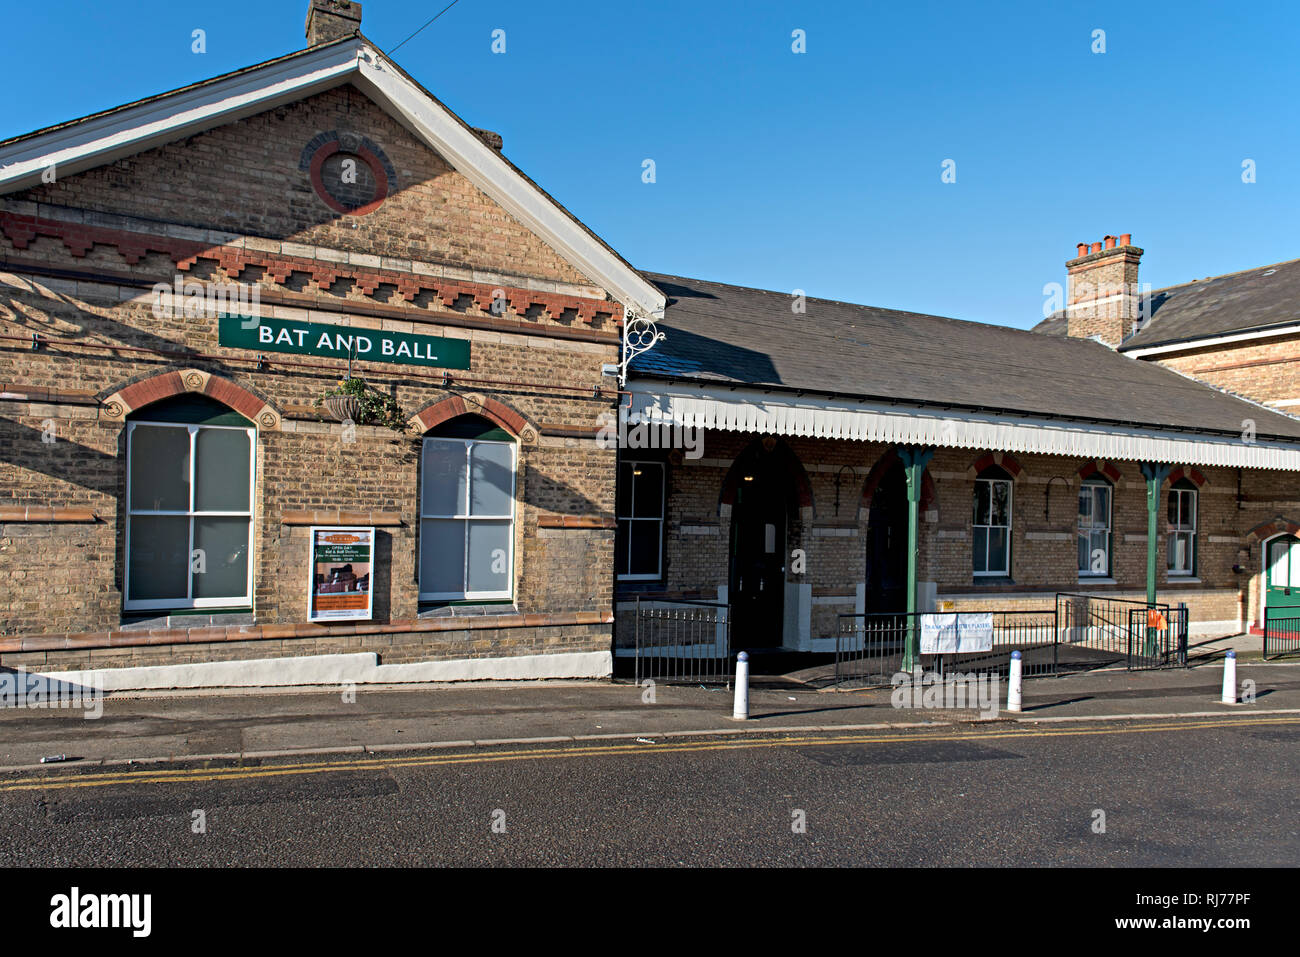 The newly refurbished Bat & Ball Station near Sevenoaks, Kent, UK.The Station was the first railway station in Sevenoaks and used by Queen Victoria Stock Photo